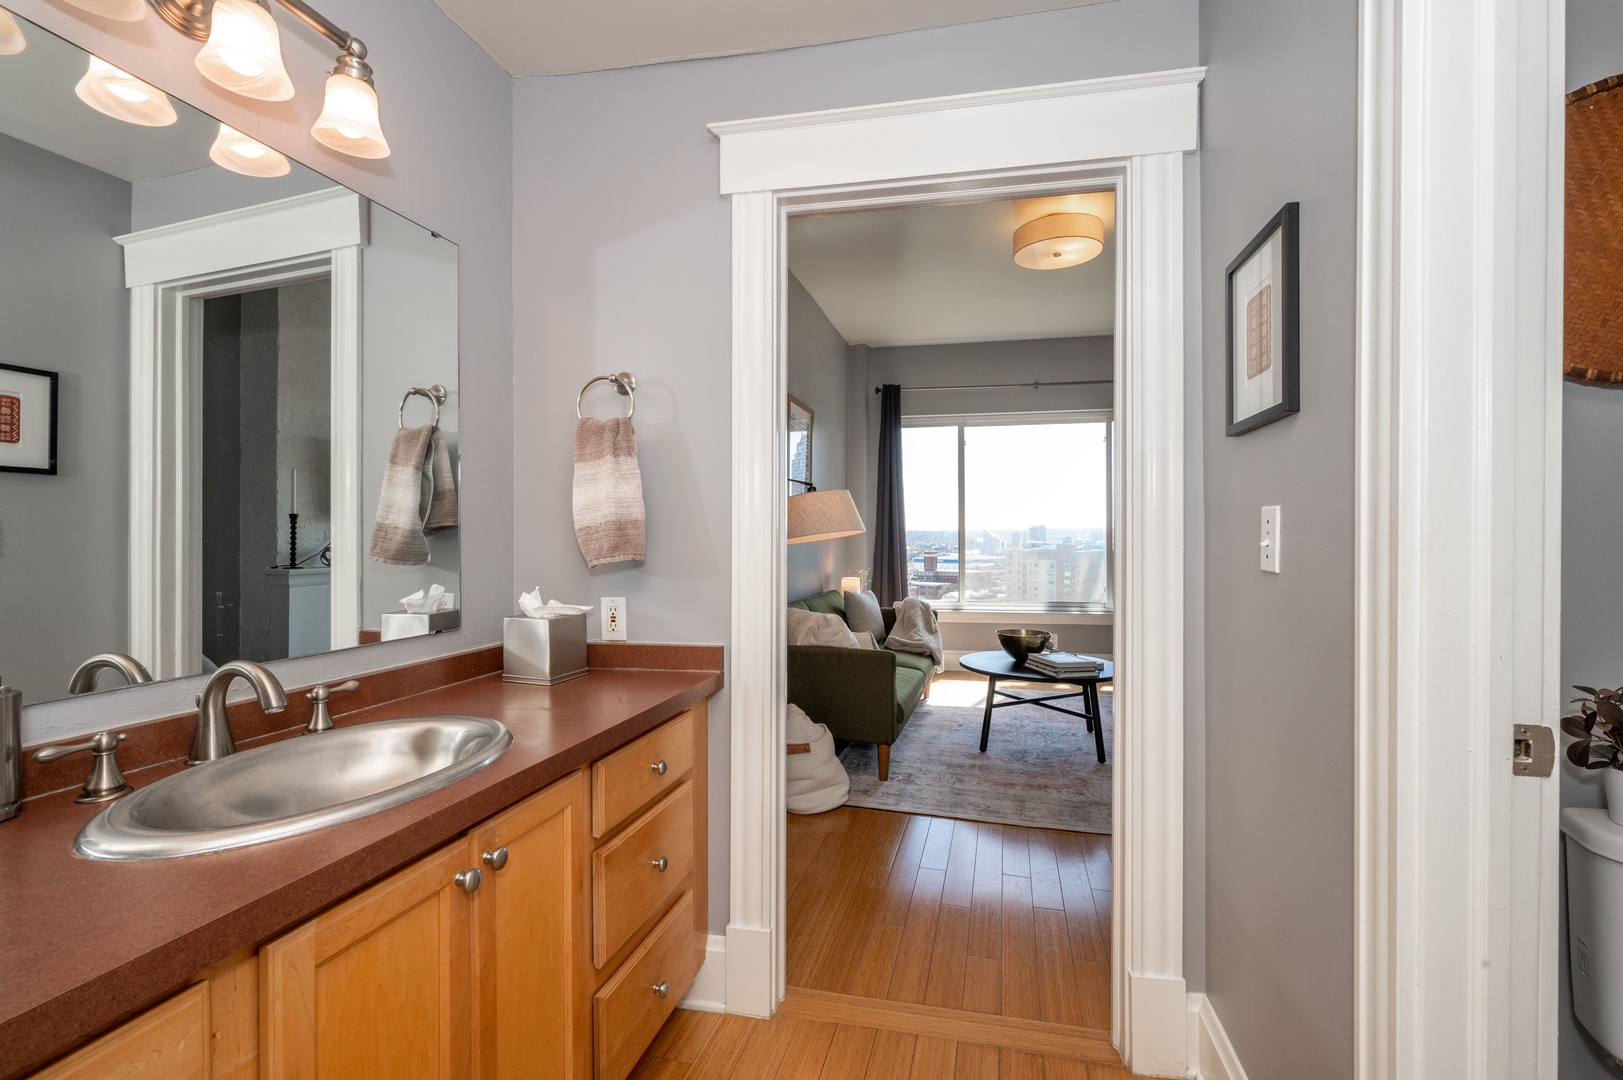 The Bathroom offers warm finishes and a Single Vanity and Shower/Tub Combo